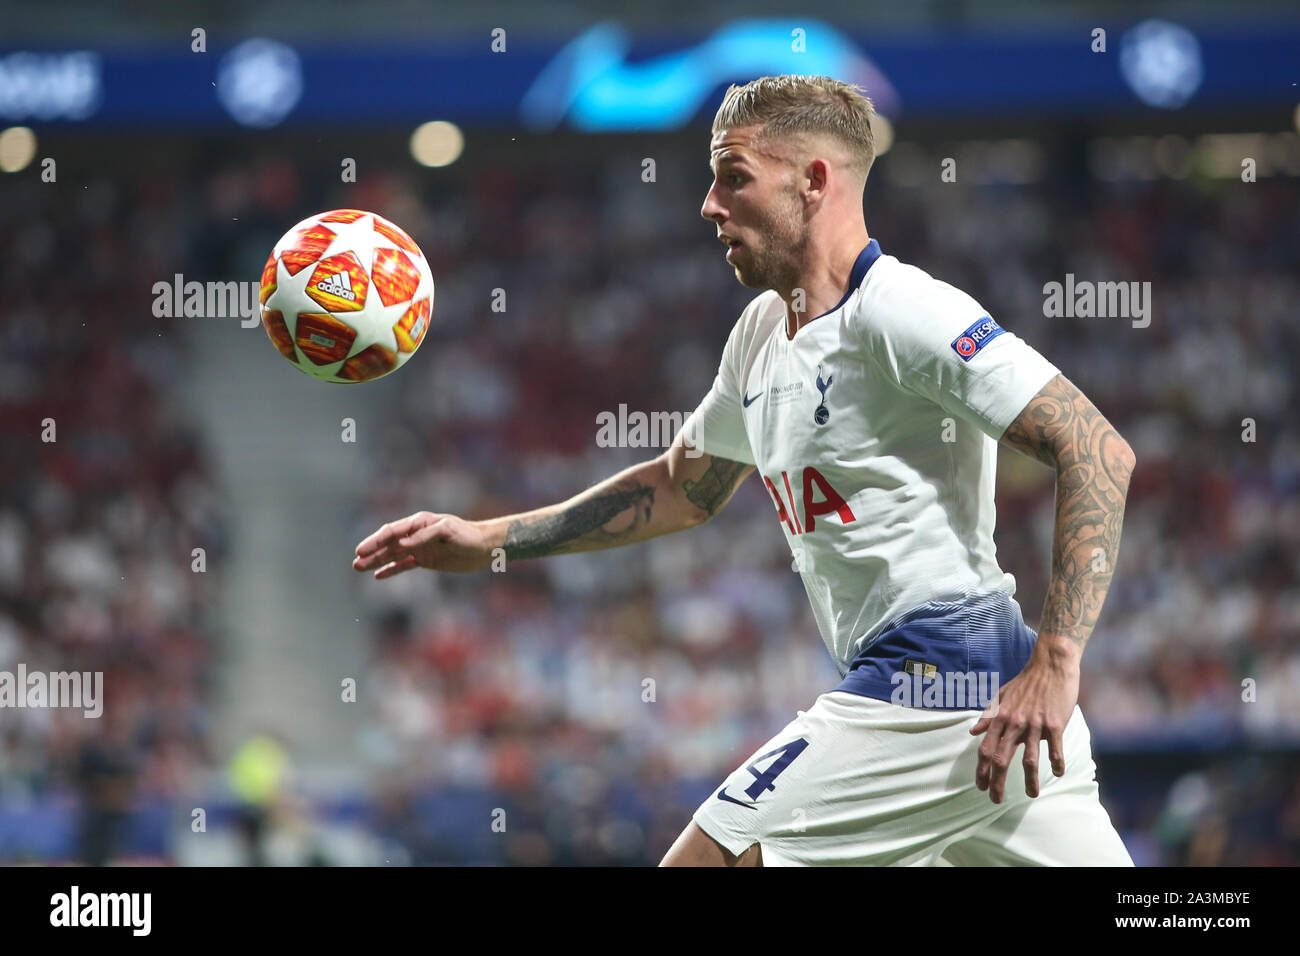 MADRID, SPAIN - JUNE 01, 2019: Toby Alderweireld (Tottenham) pictured during the final of the 2019/20 UEFA Champions League Final. Stock Photo